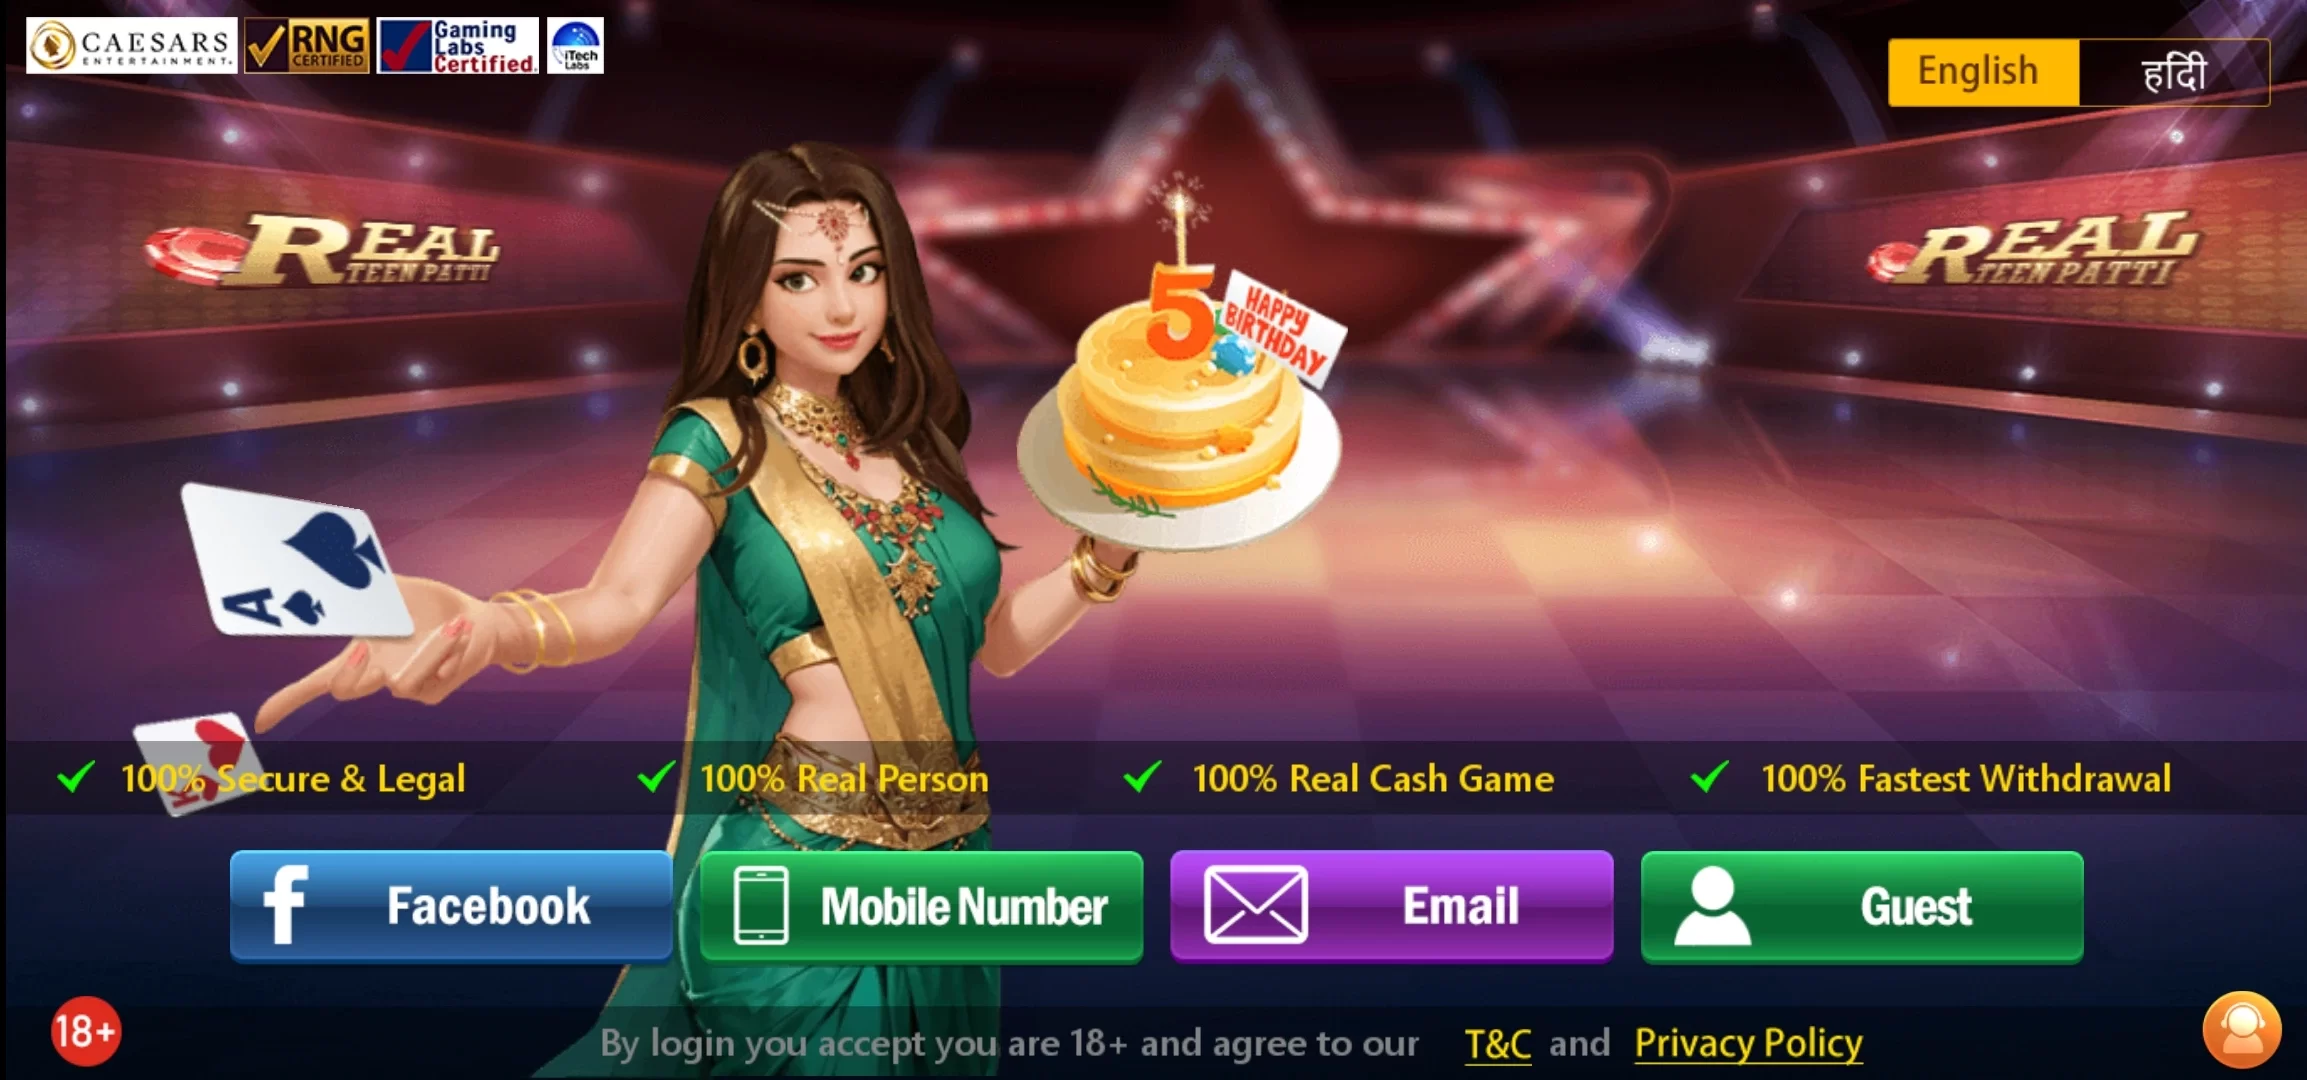 How To Register On Real Teen Patti App